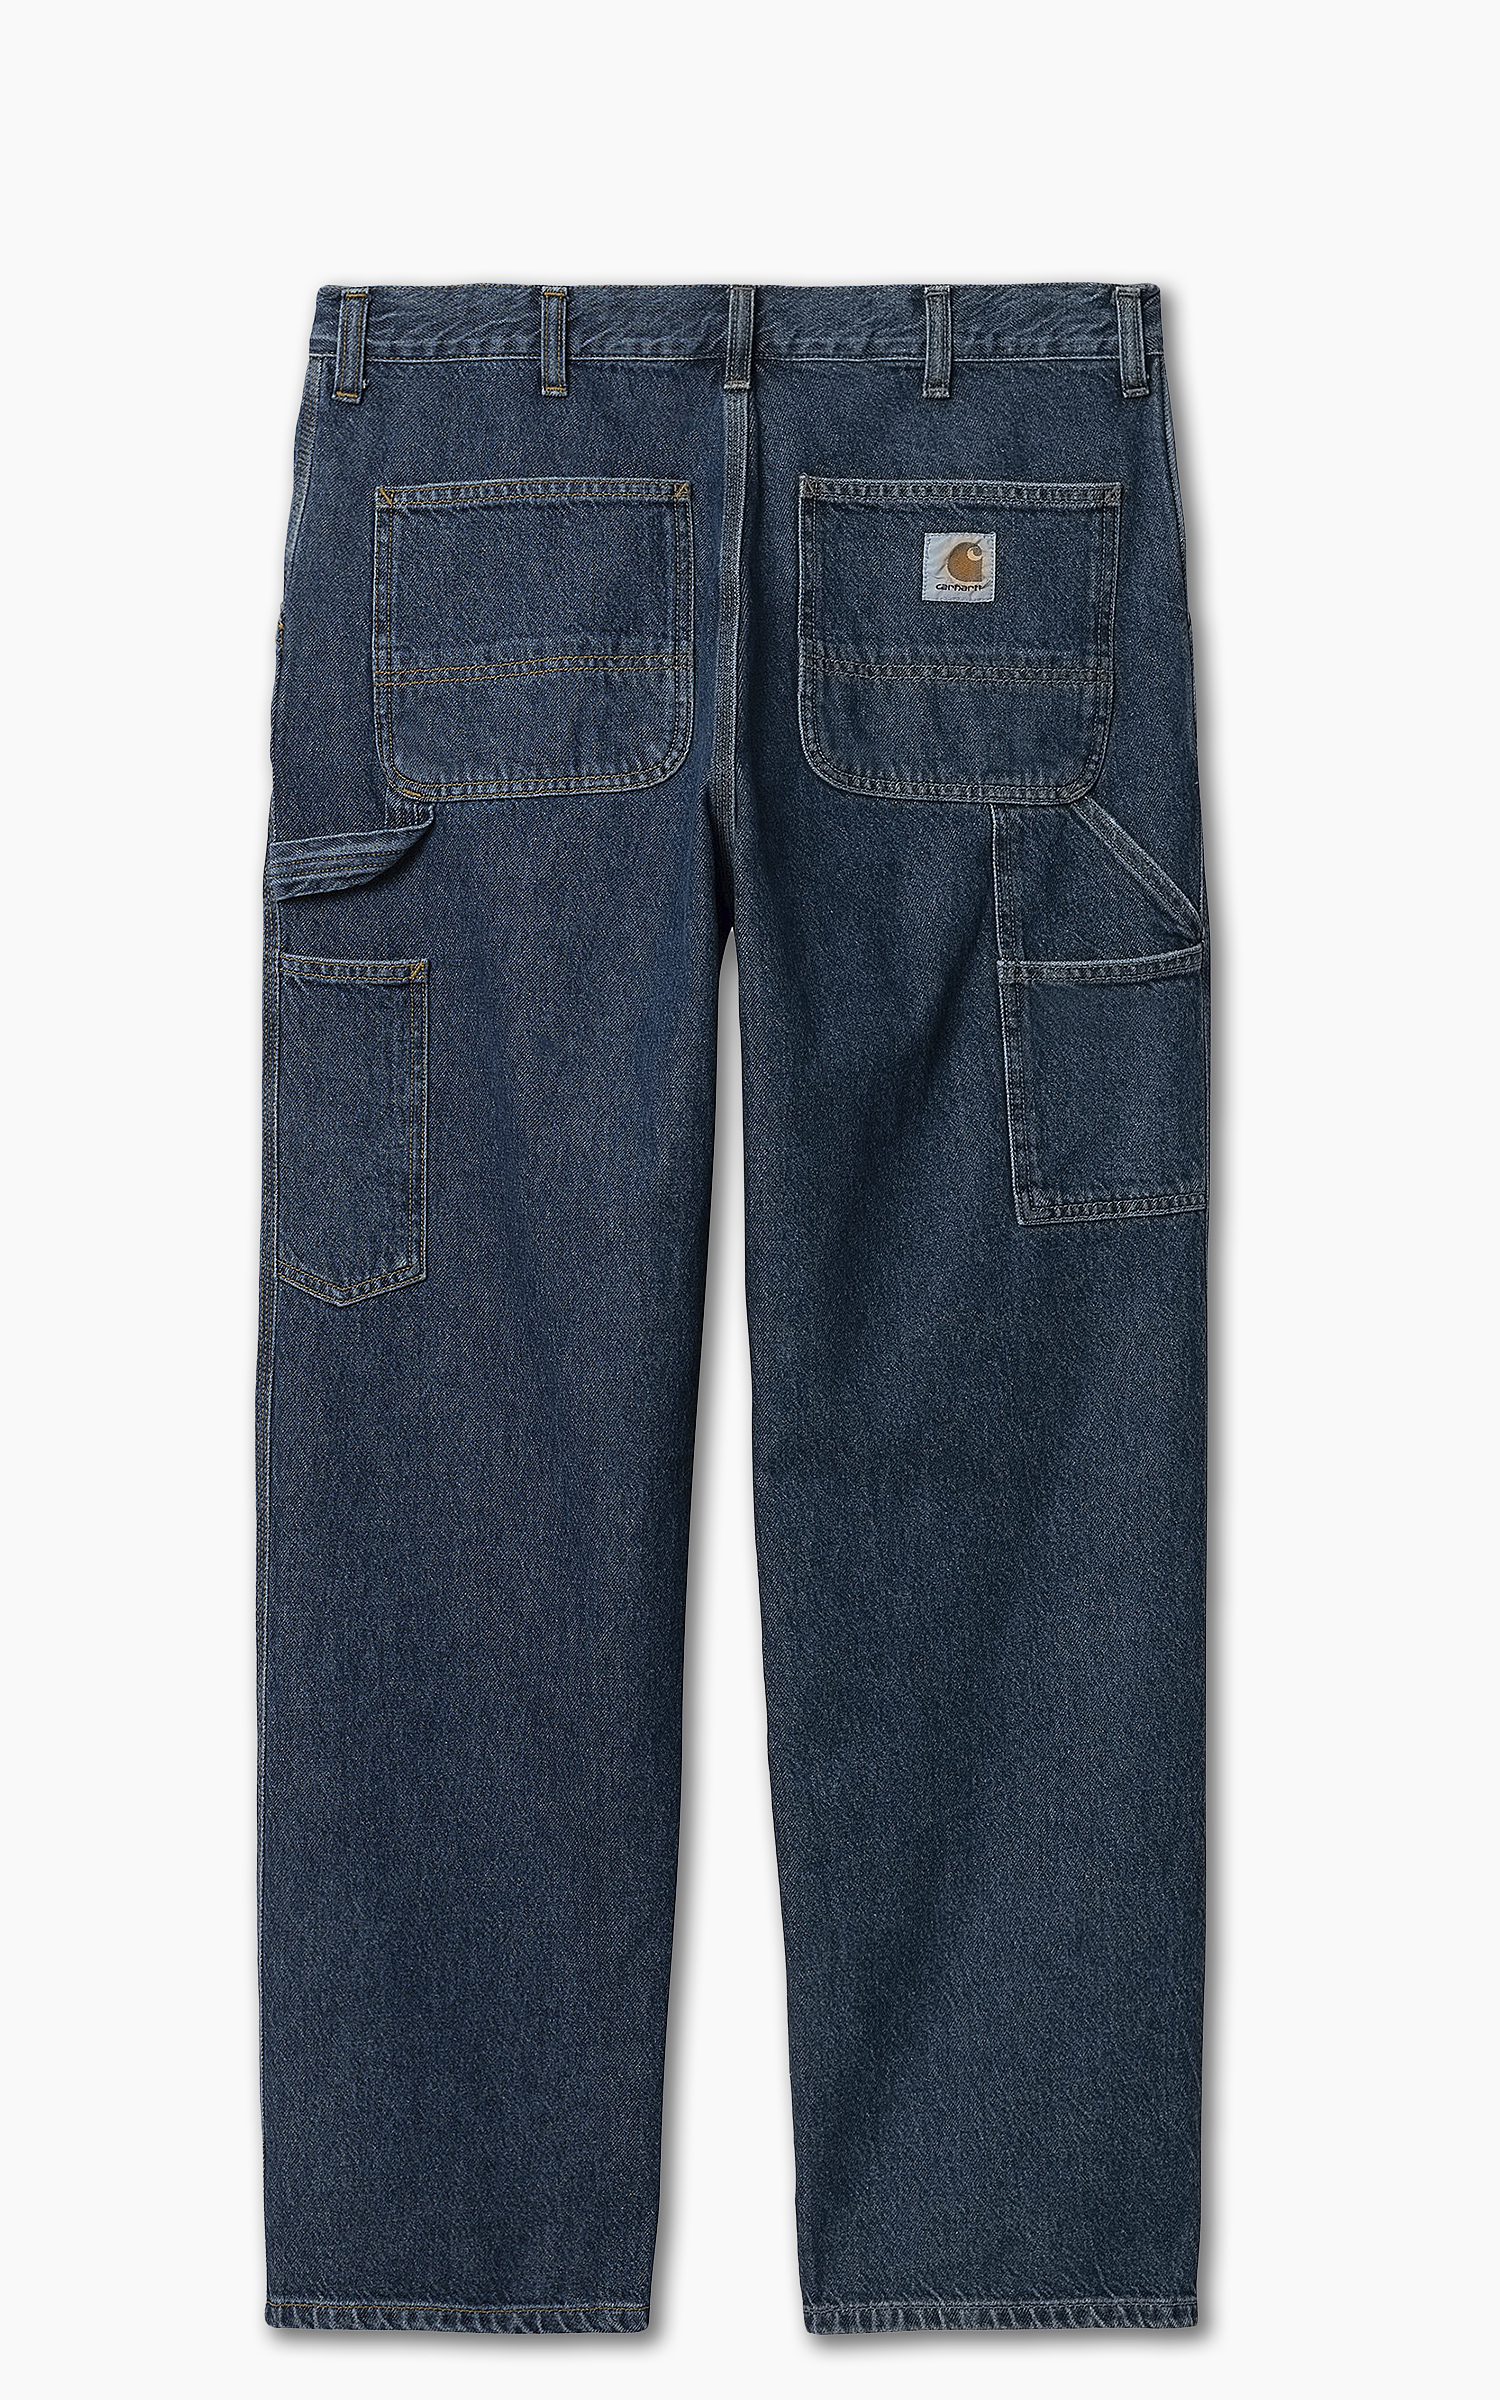 Carhartt WIP Single Knee Pant Blue Stone Washed | Cultizm